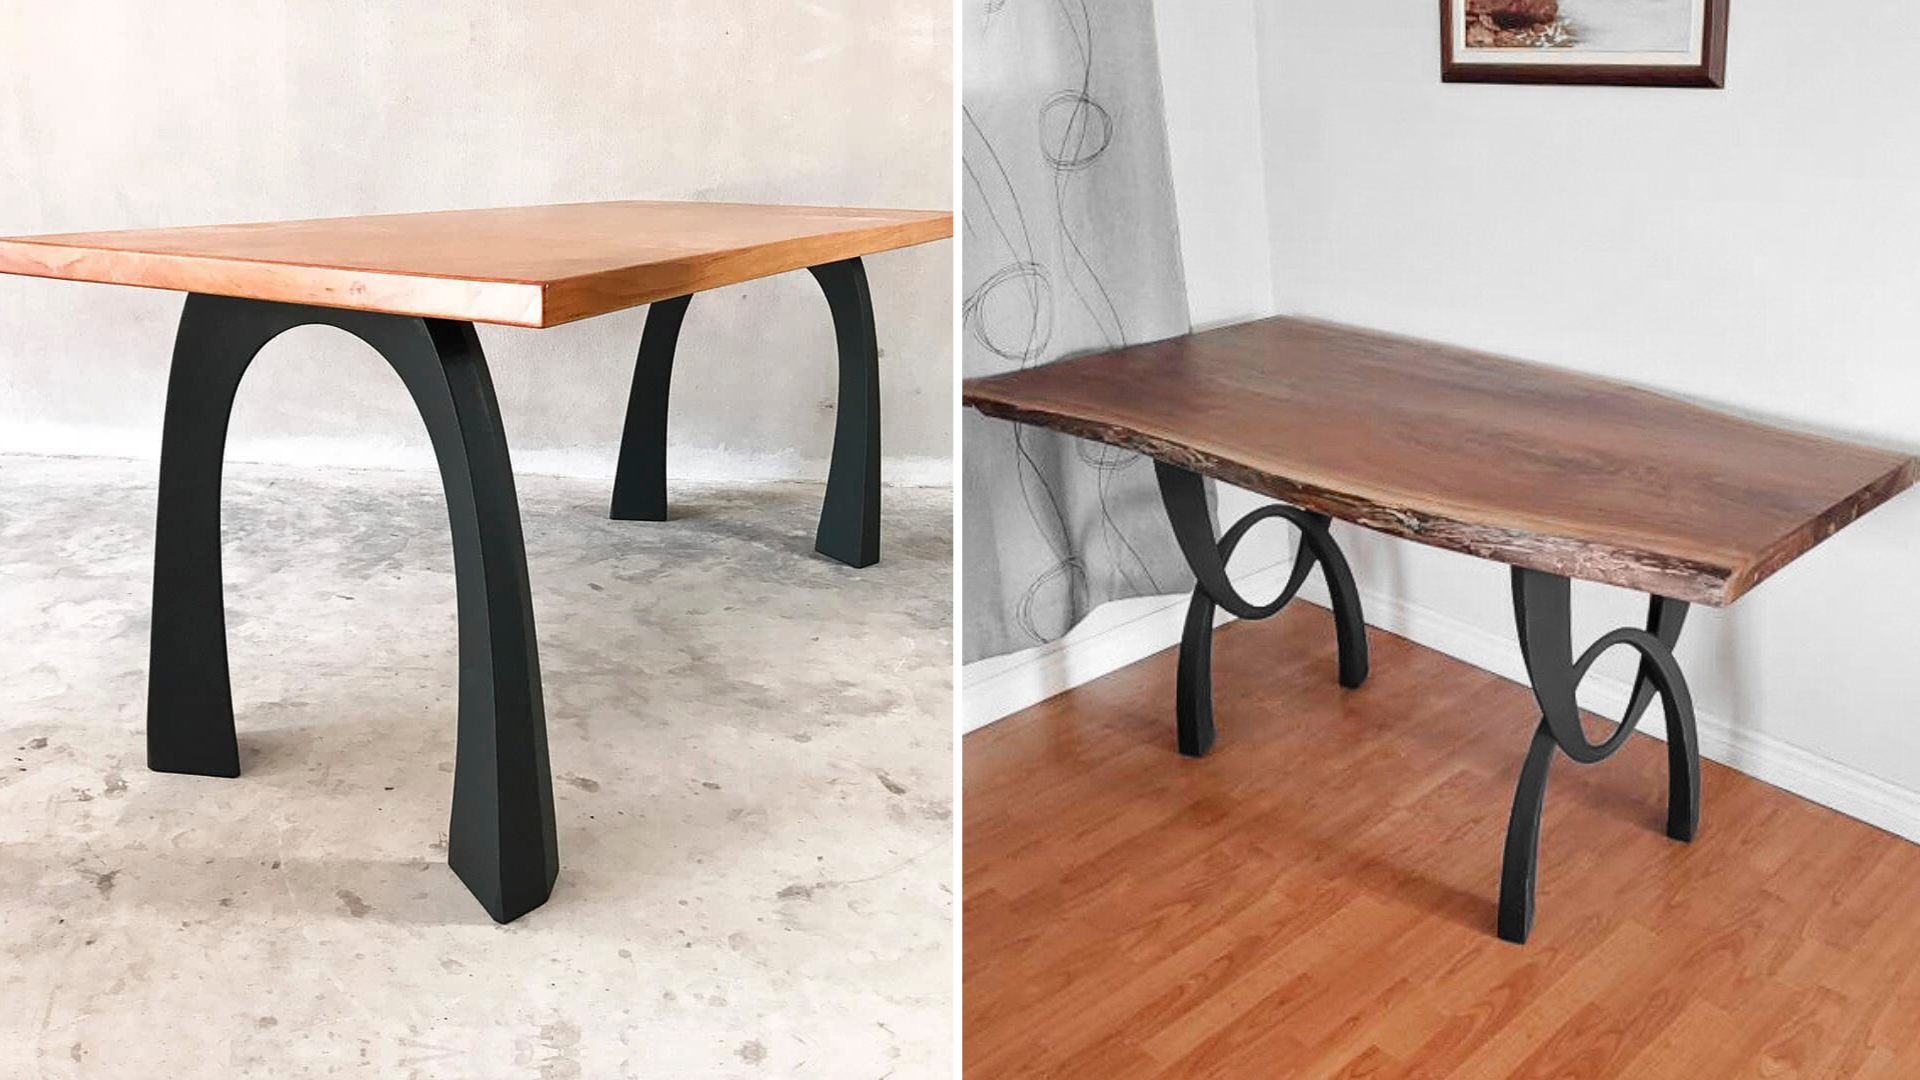 U-shaped table legs are table legs that have a U-shaped profile. They have two vertical sides connected by a horizontal base.